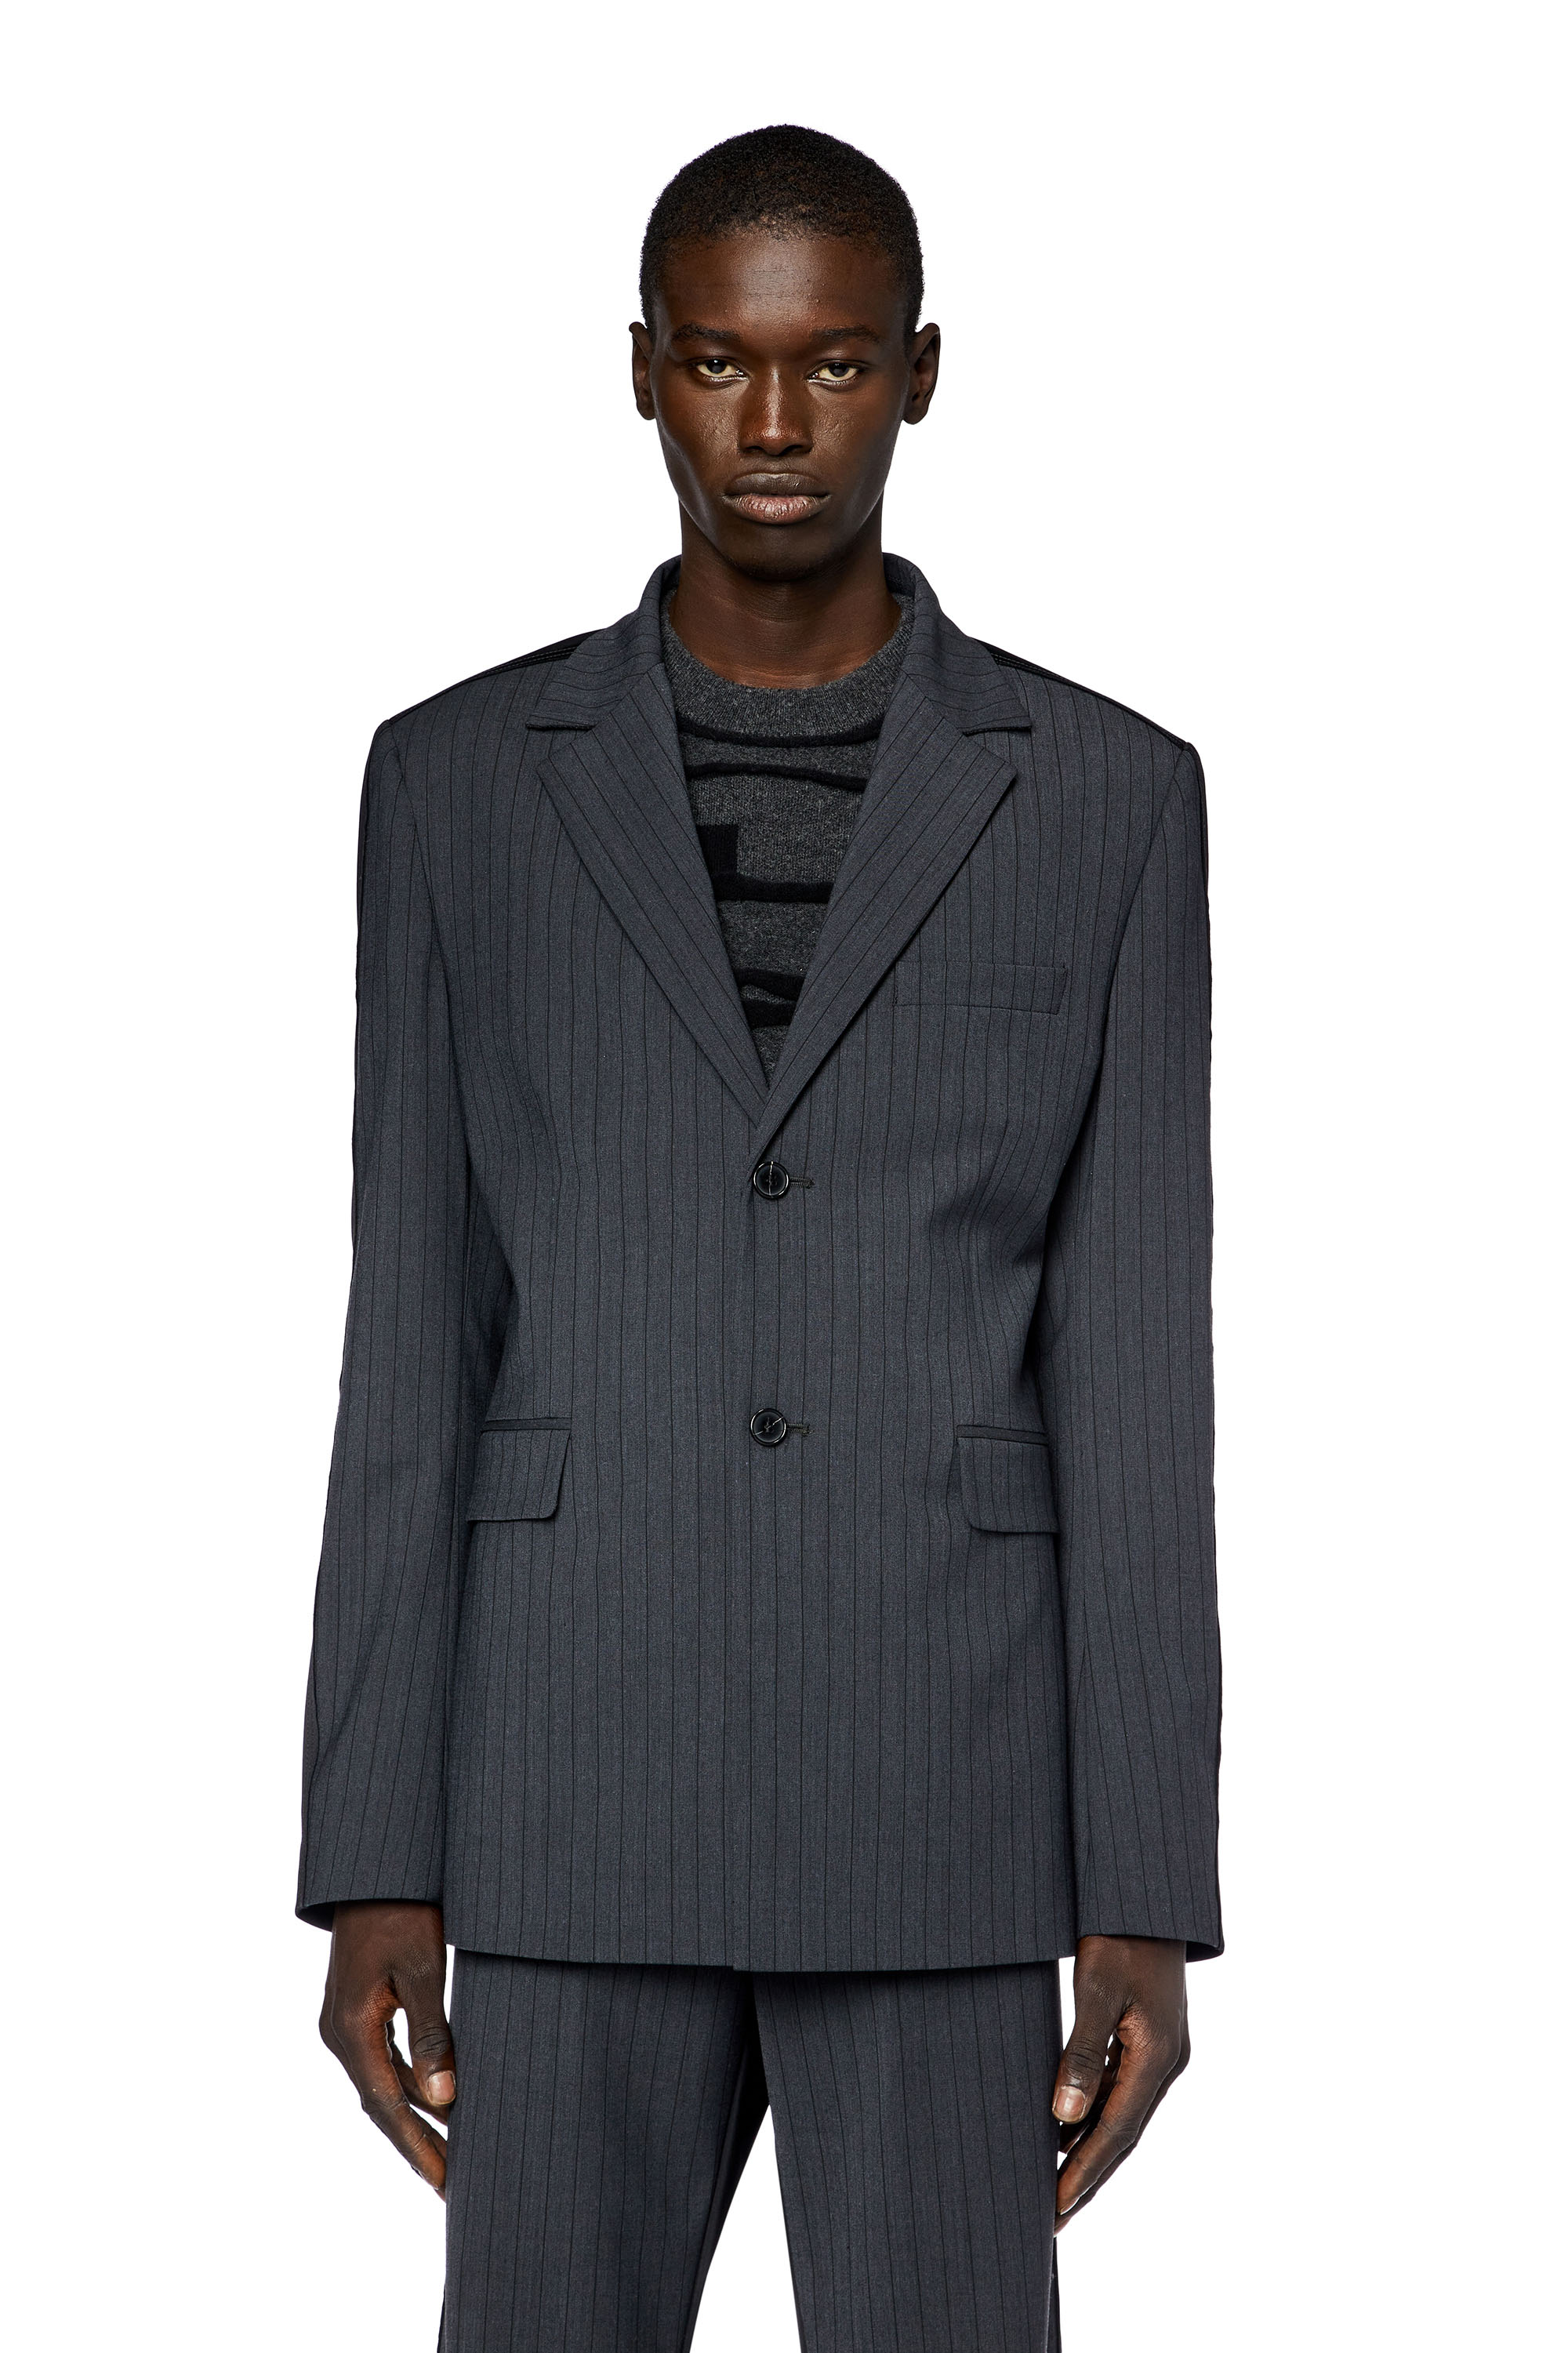 Diesel - J-WIRE, Man Blazer in pinstriped cool wool and jersey in Grey - Image 6